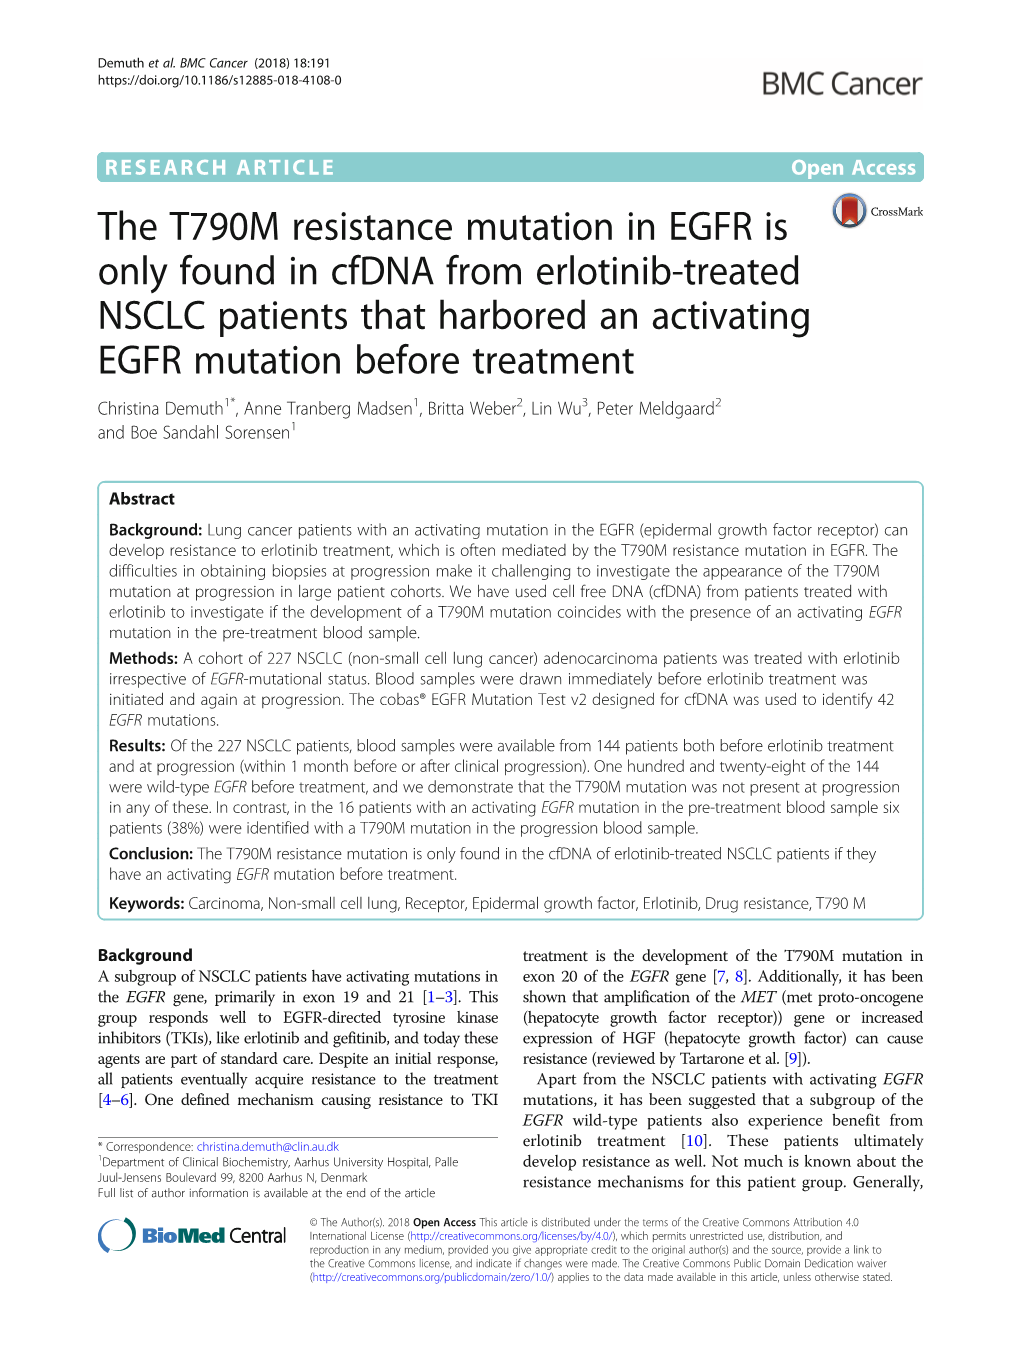 The T790M Resistance Mutation in EGFR Is Only Found in Cfdna From